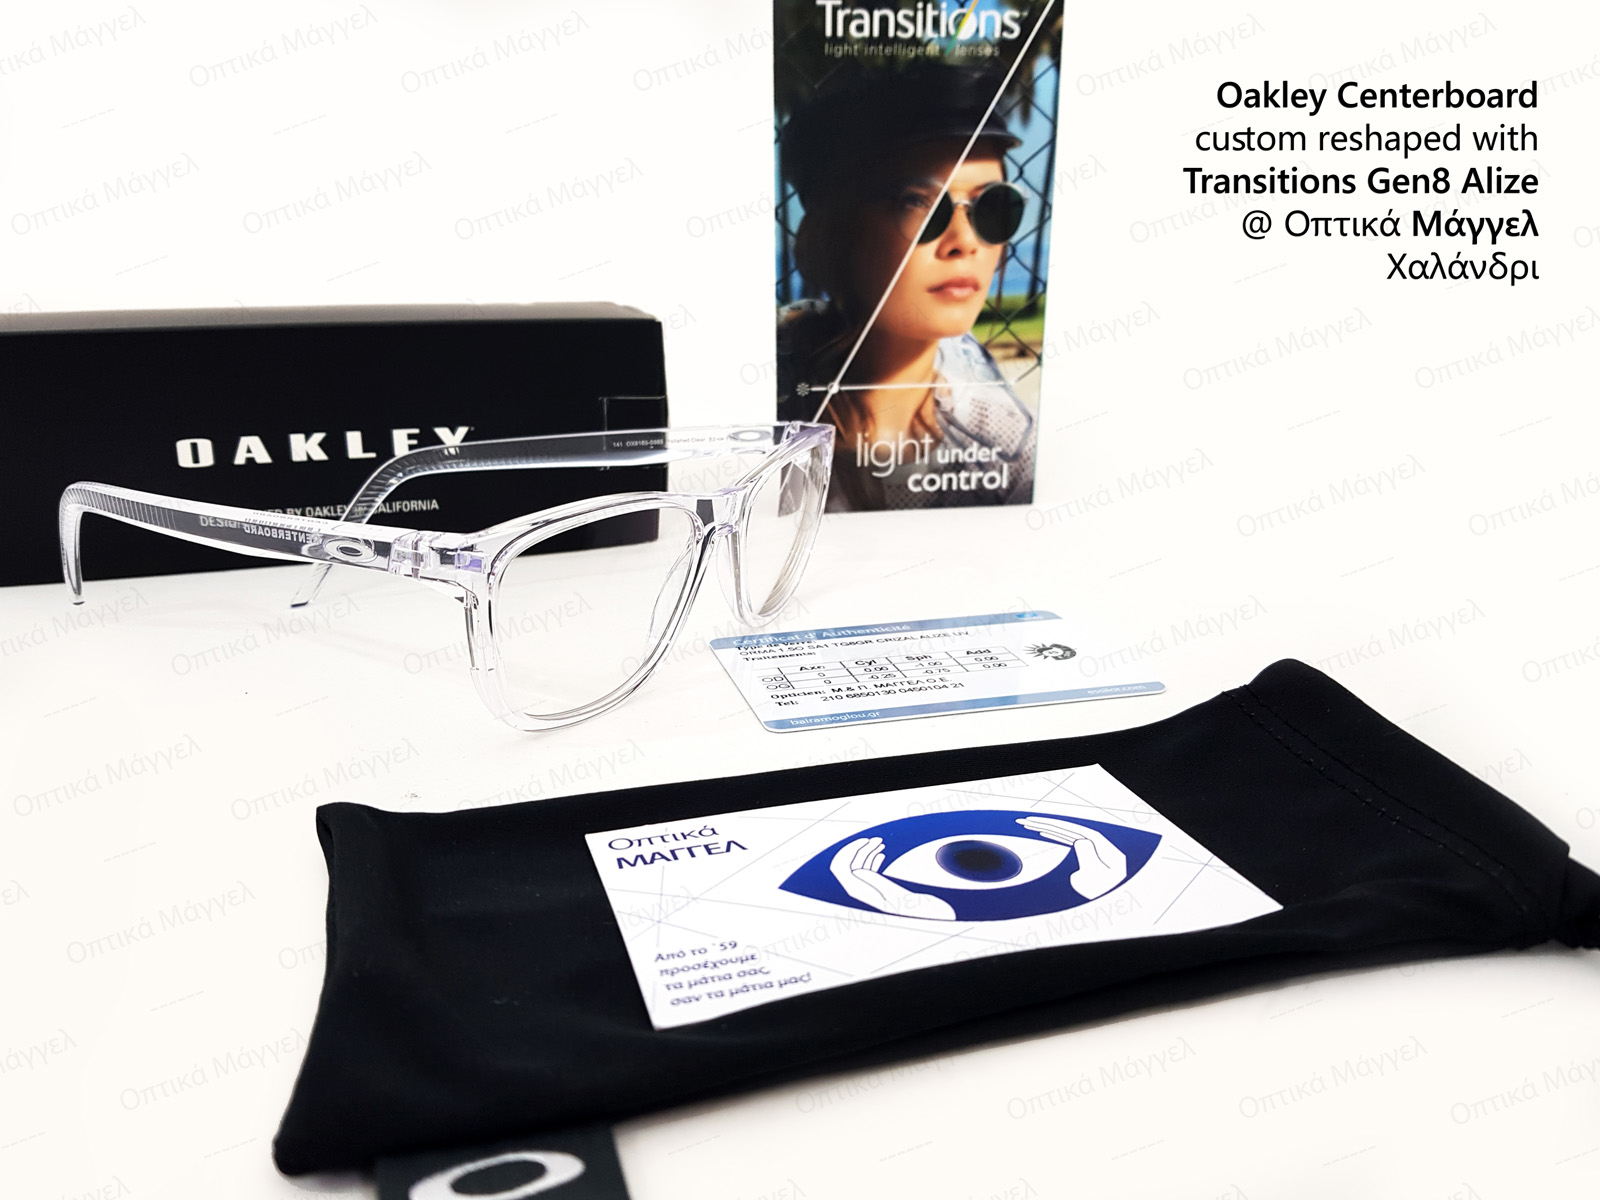 Perfection! Oakley Centerboard custom reshaped with Essilor Transitions Gen8 Alize